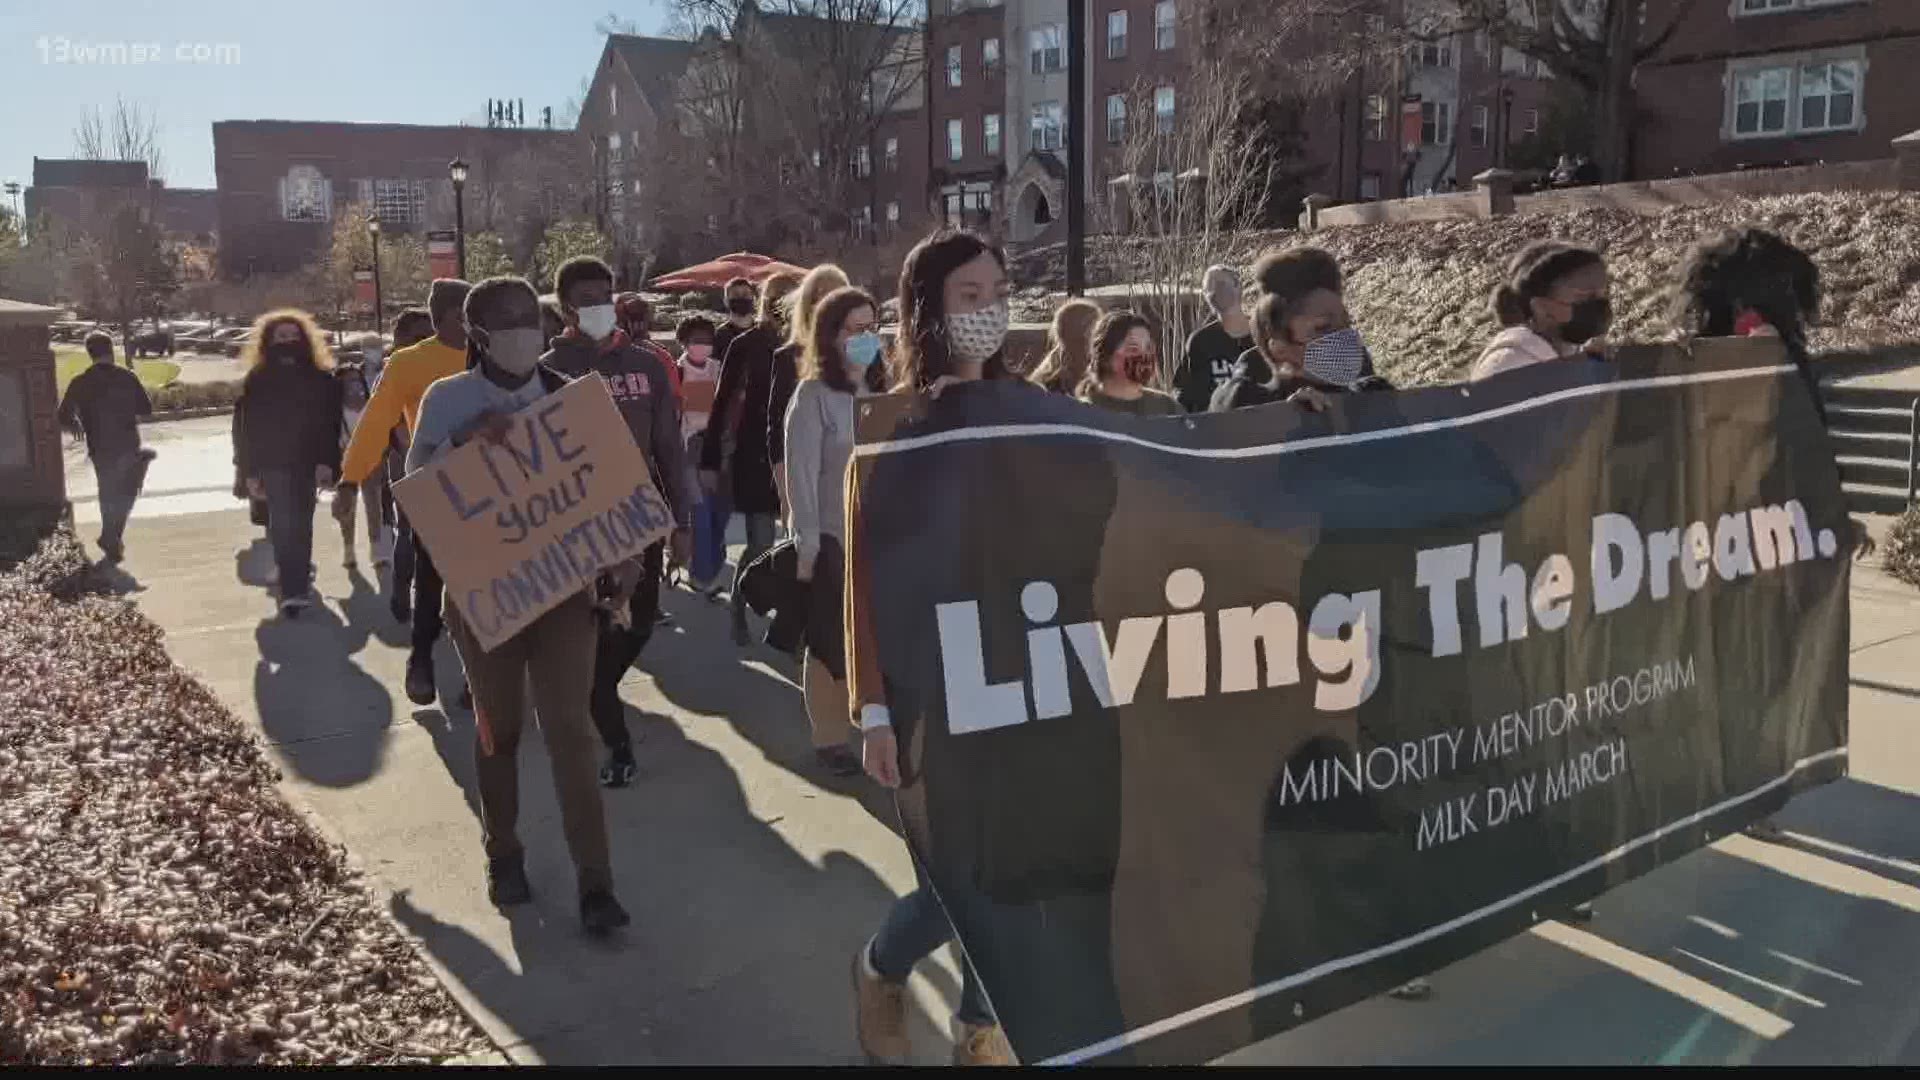 Mercer University students and staff came together Thursday to honor the late Dr. Martin Luther King Jr. in the third annual "Living the Dream" March.